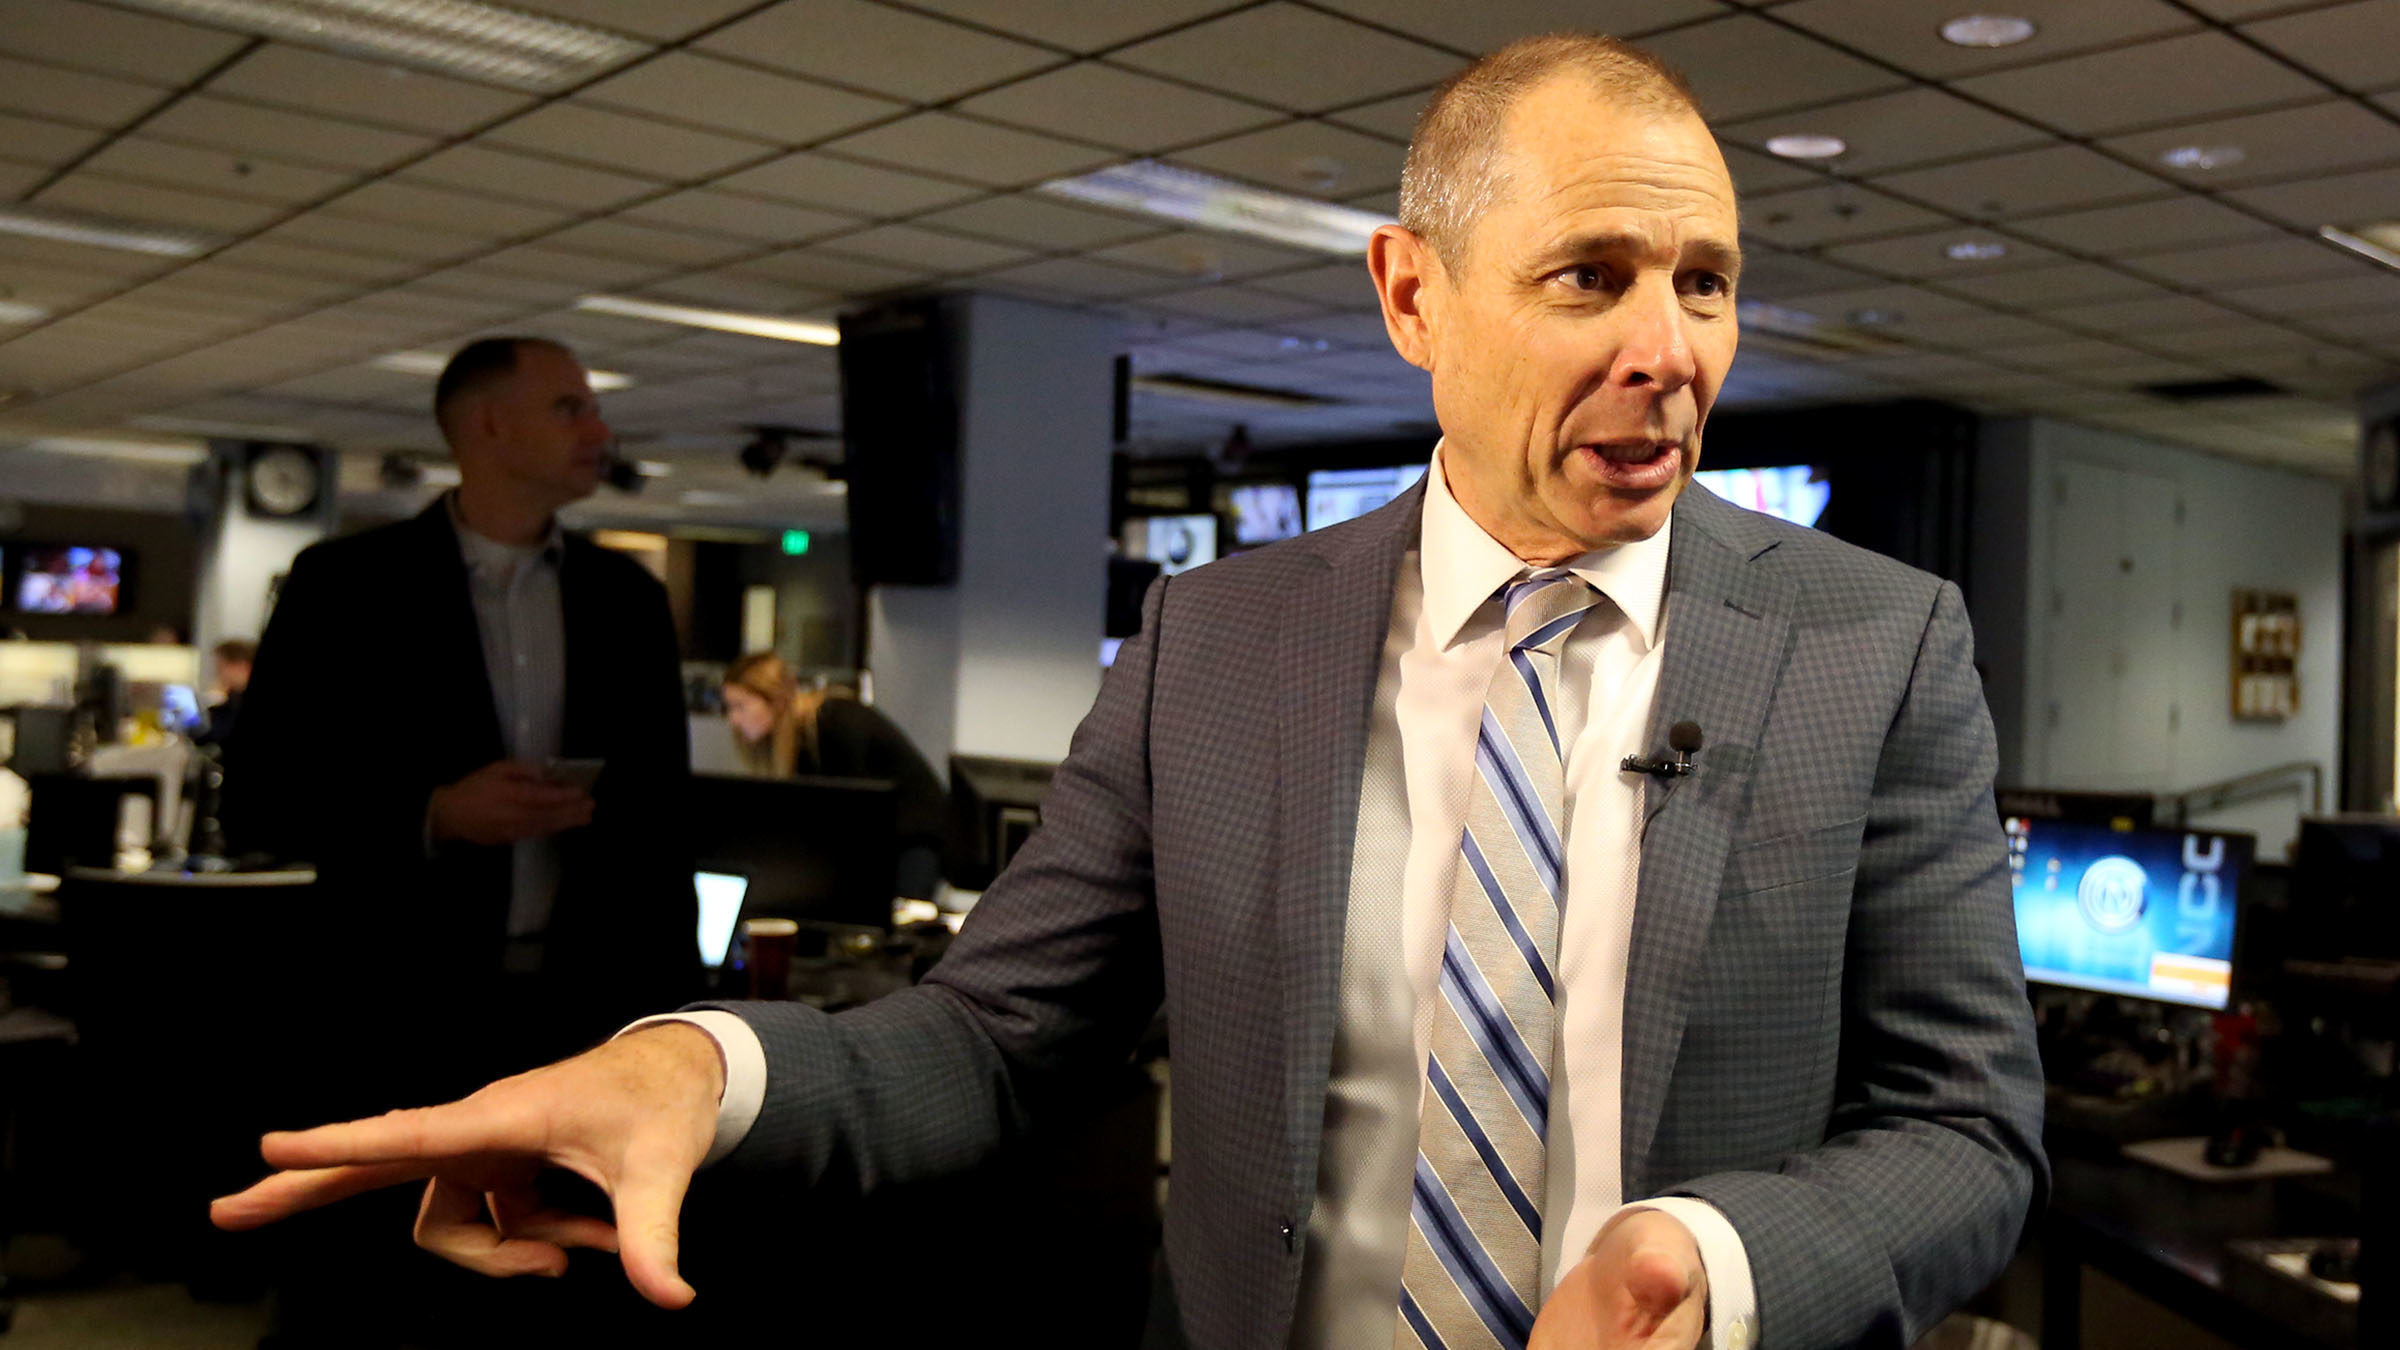 Utah Rep. John Curtis discusses how a “stunt” by TikTok to influence House lawmakers just anger...